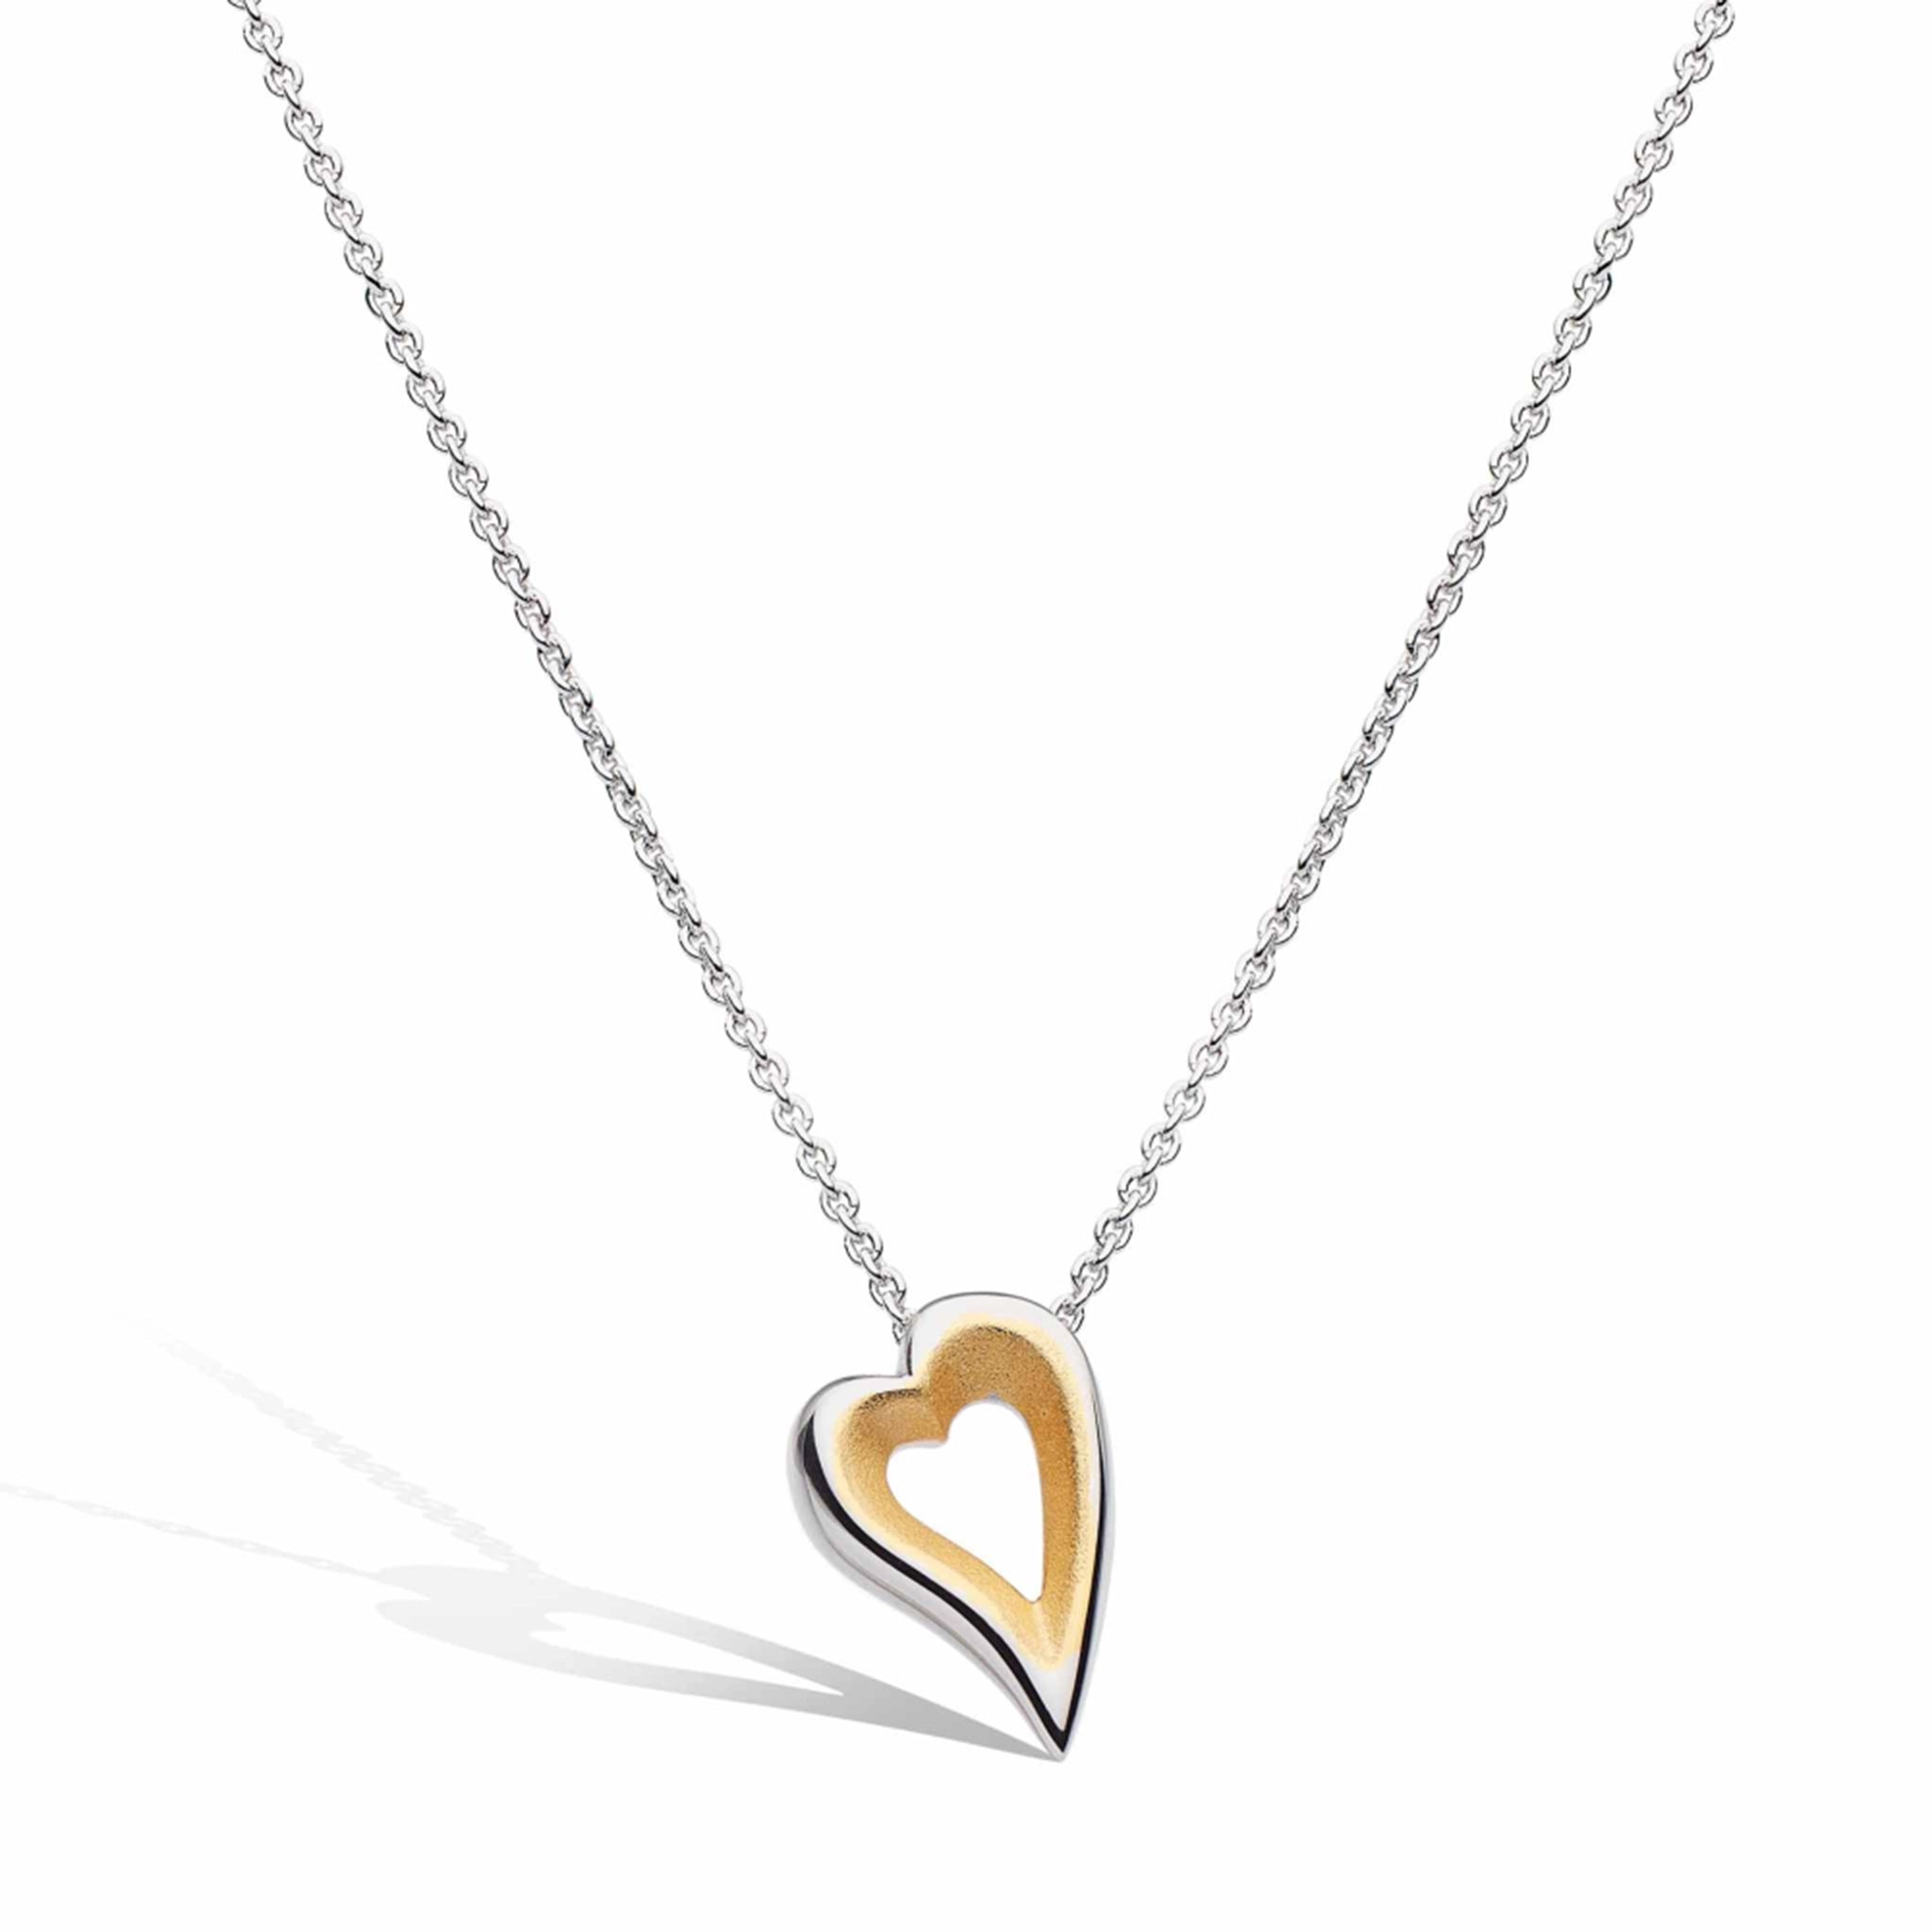 A silver open heart shaped pendant with satin gold plated interior